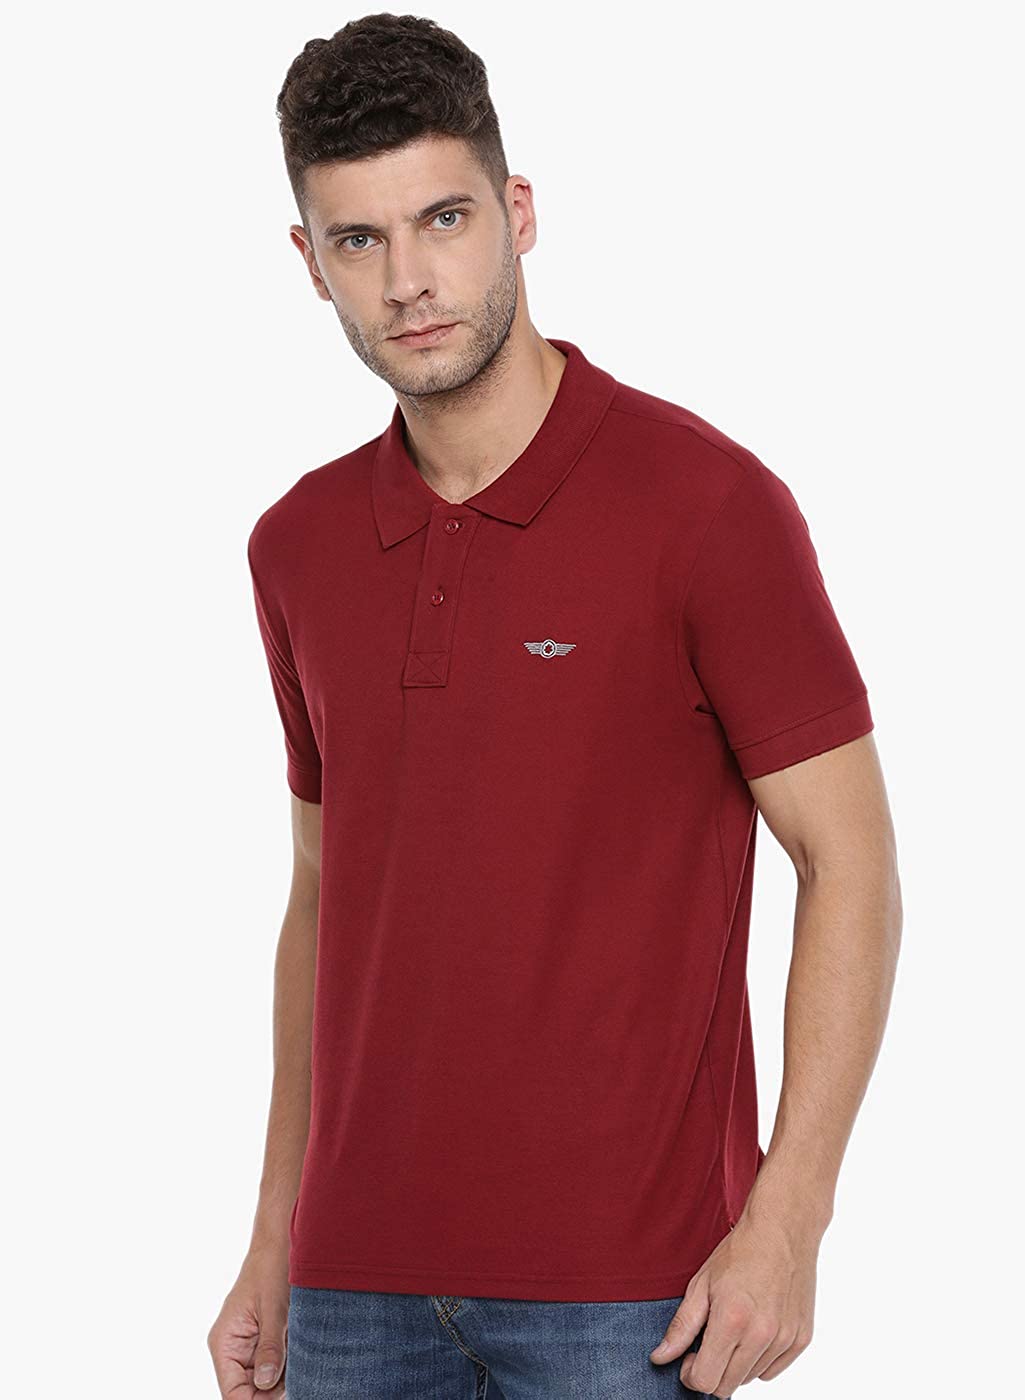 Maroon Slim Fit Polo Neck T-Shirt with collar for Men - Stilento